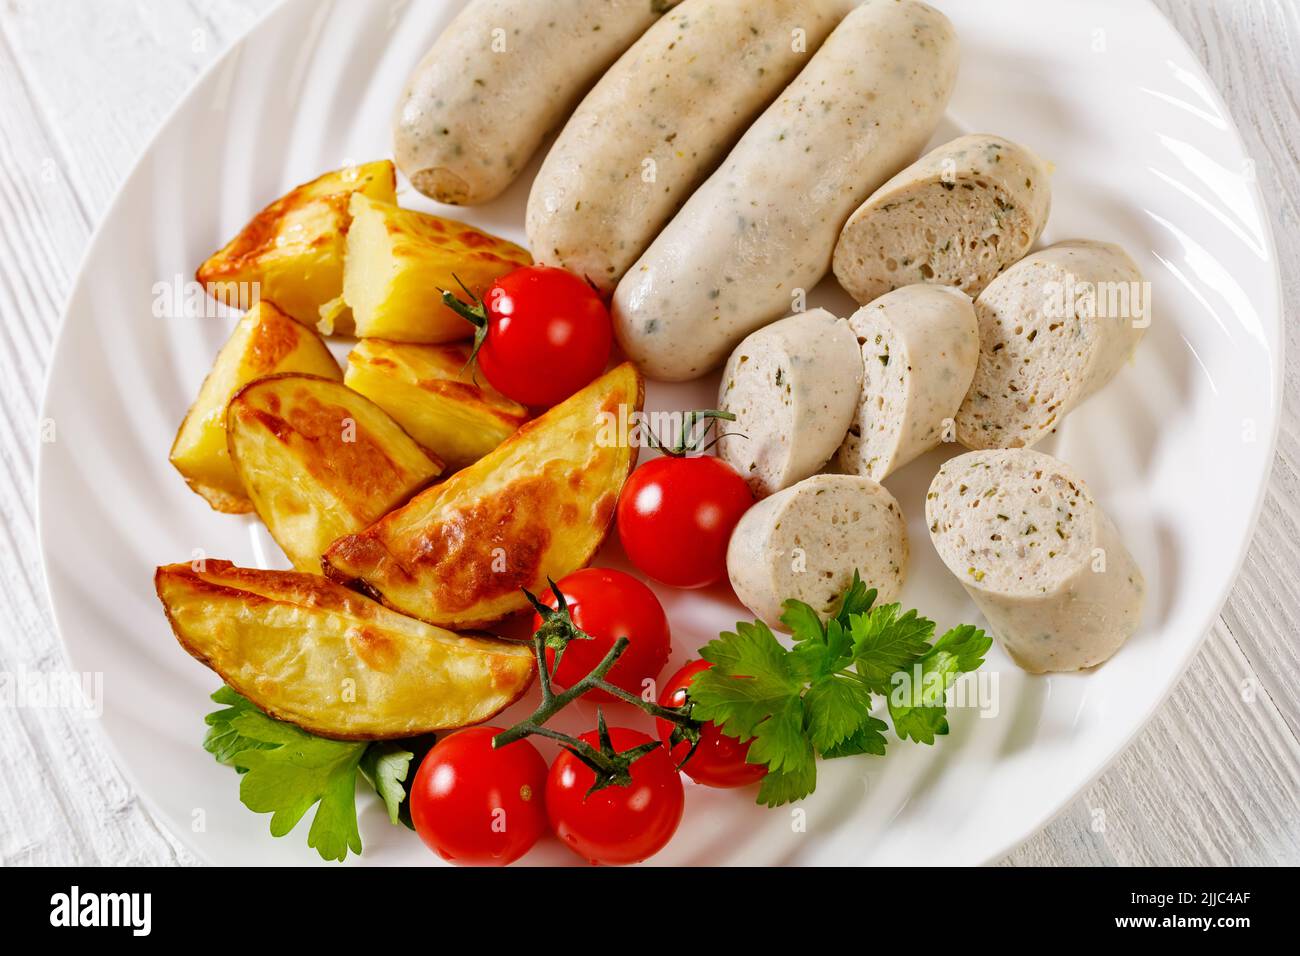 Weisswurst, bavarian white sausage of minced veal, pork back bacon, spices and parsley on white plate with roast potato, fresh tomatoes, horizontal vi Stock Photo